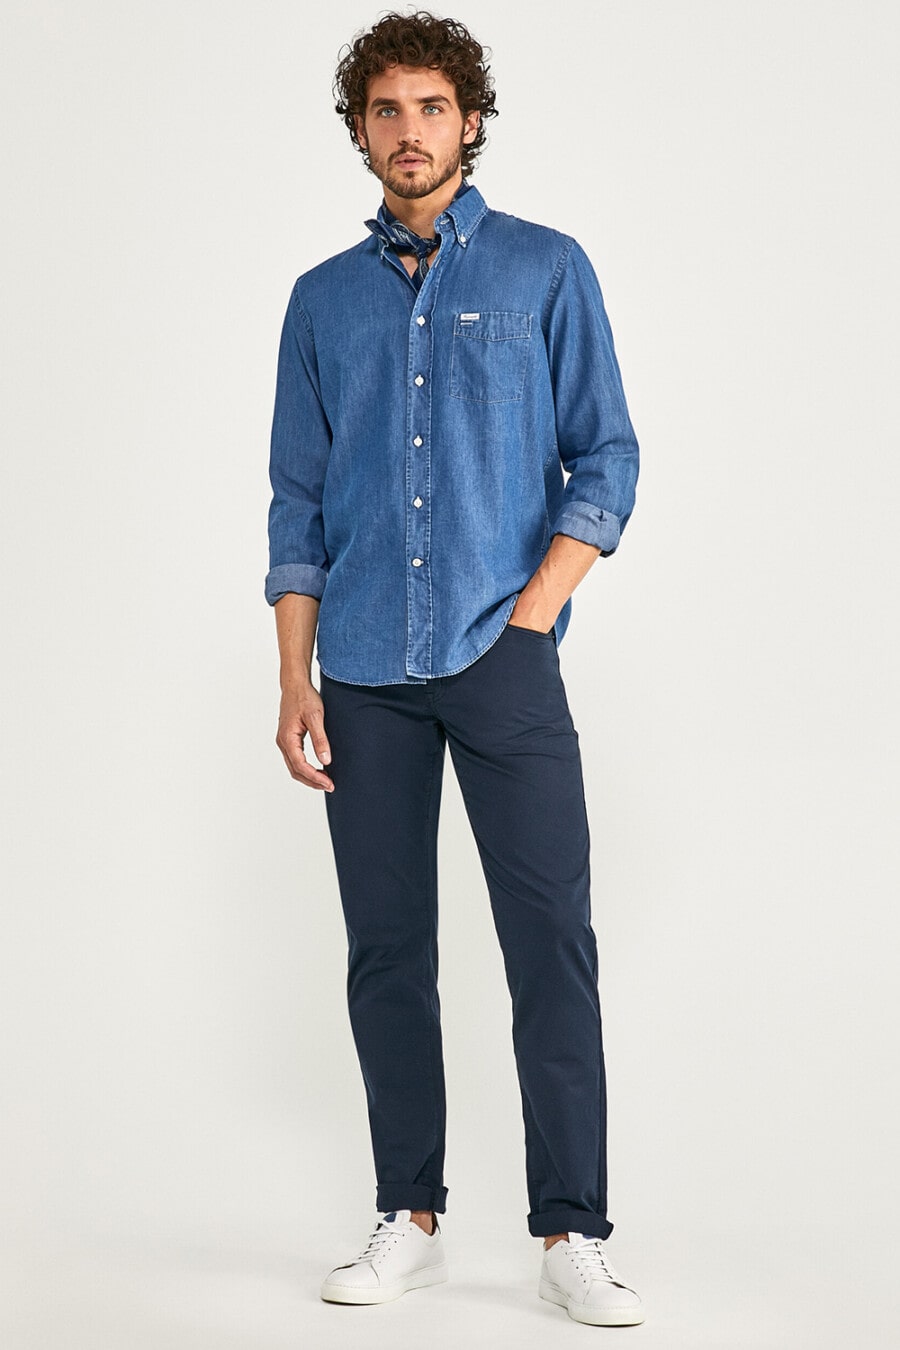 Men's navy chinos, blue denim shirt, blue neckerchief and white sneakers worn sockless outfit